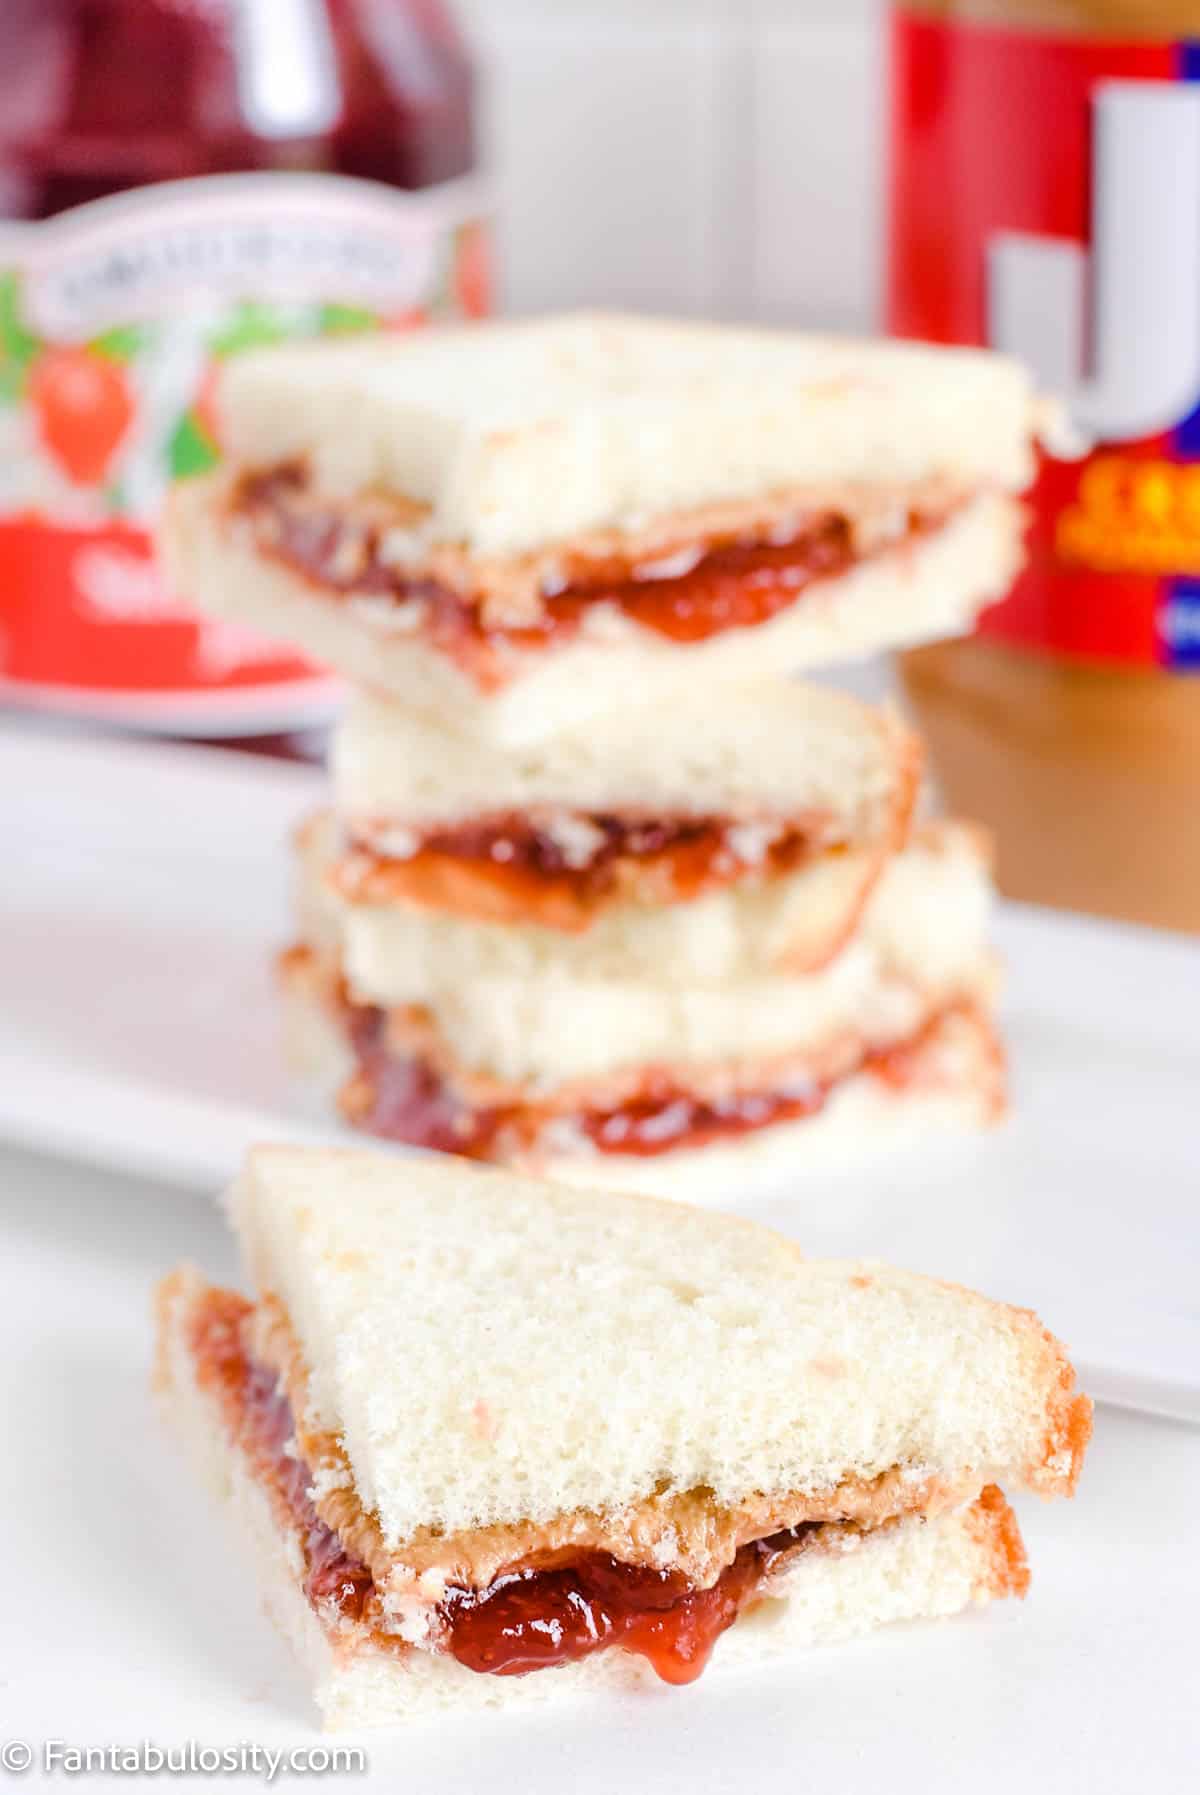 Stacked small triangles of peanut butter and jelly sandwiches